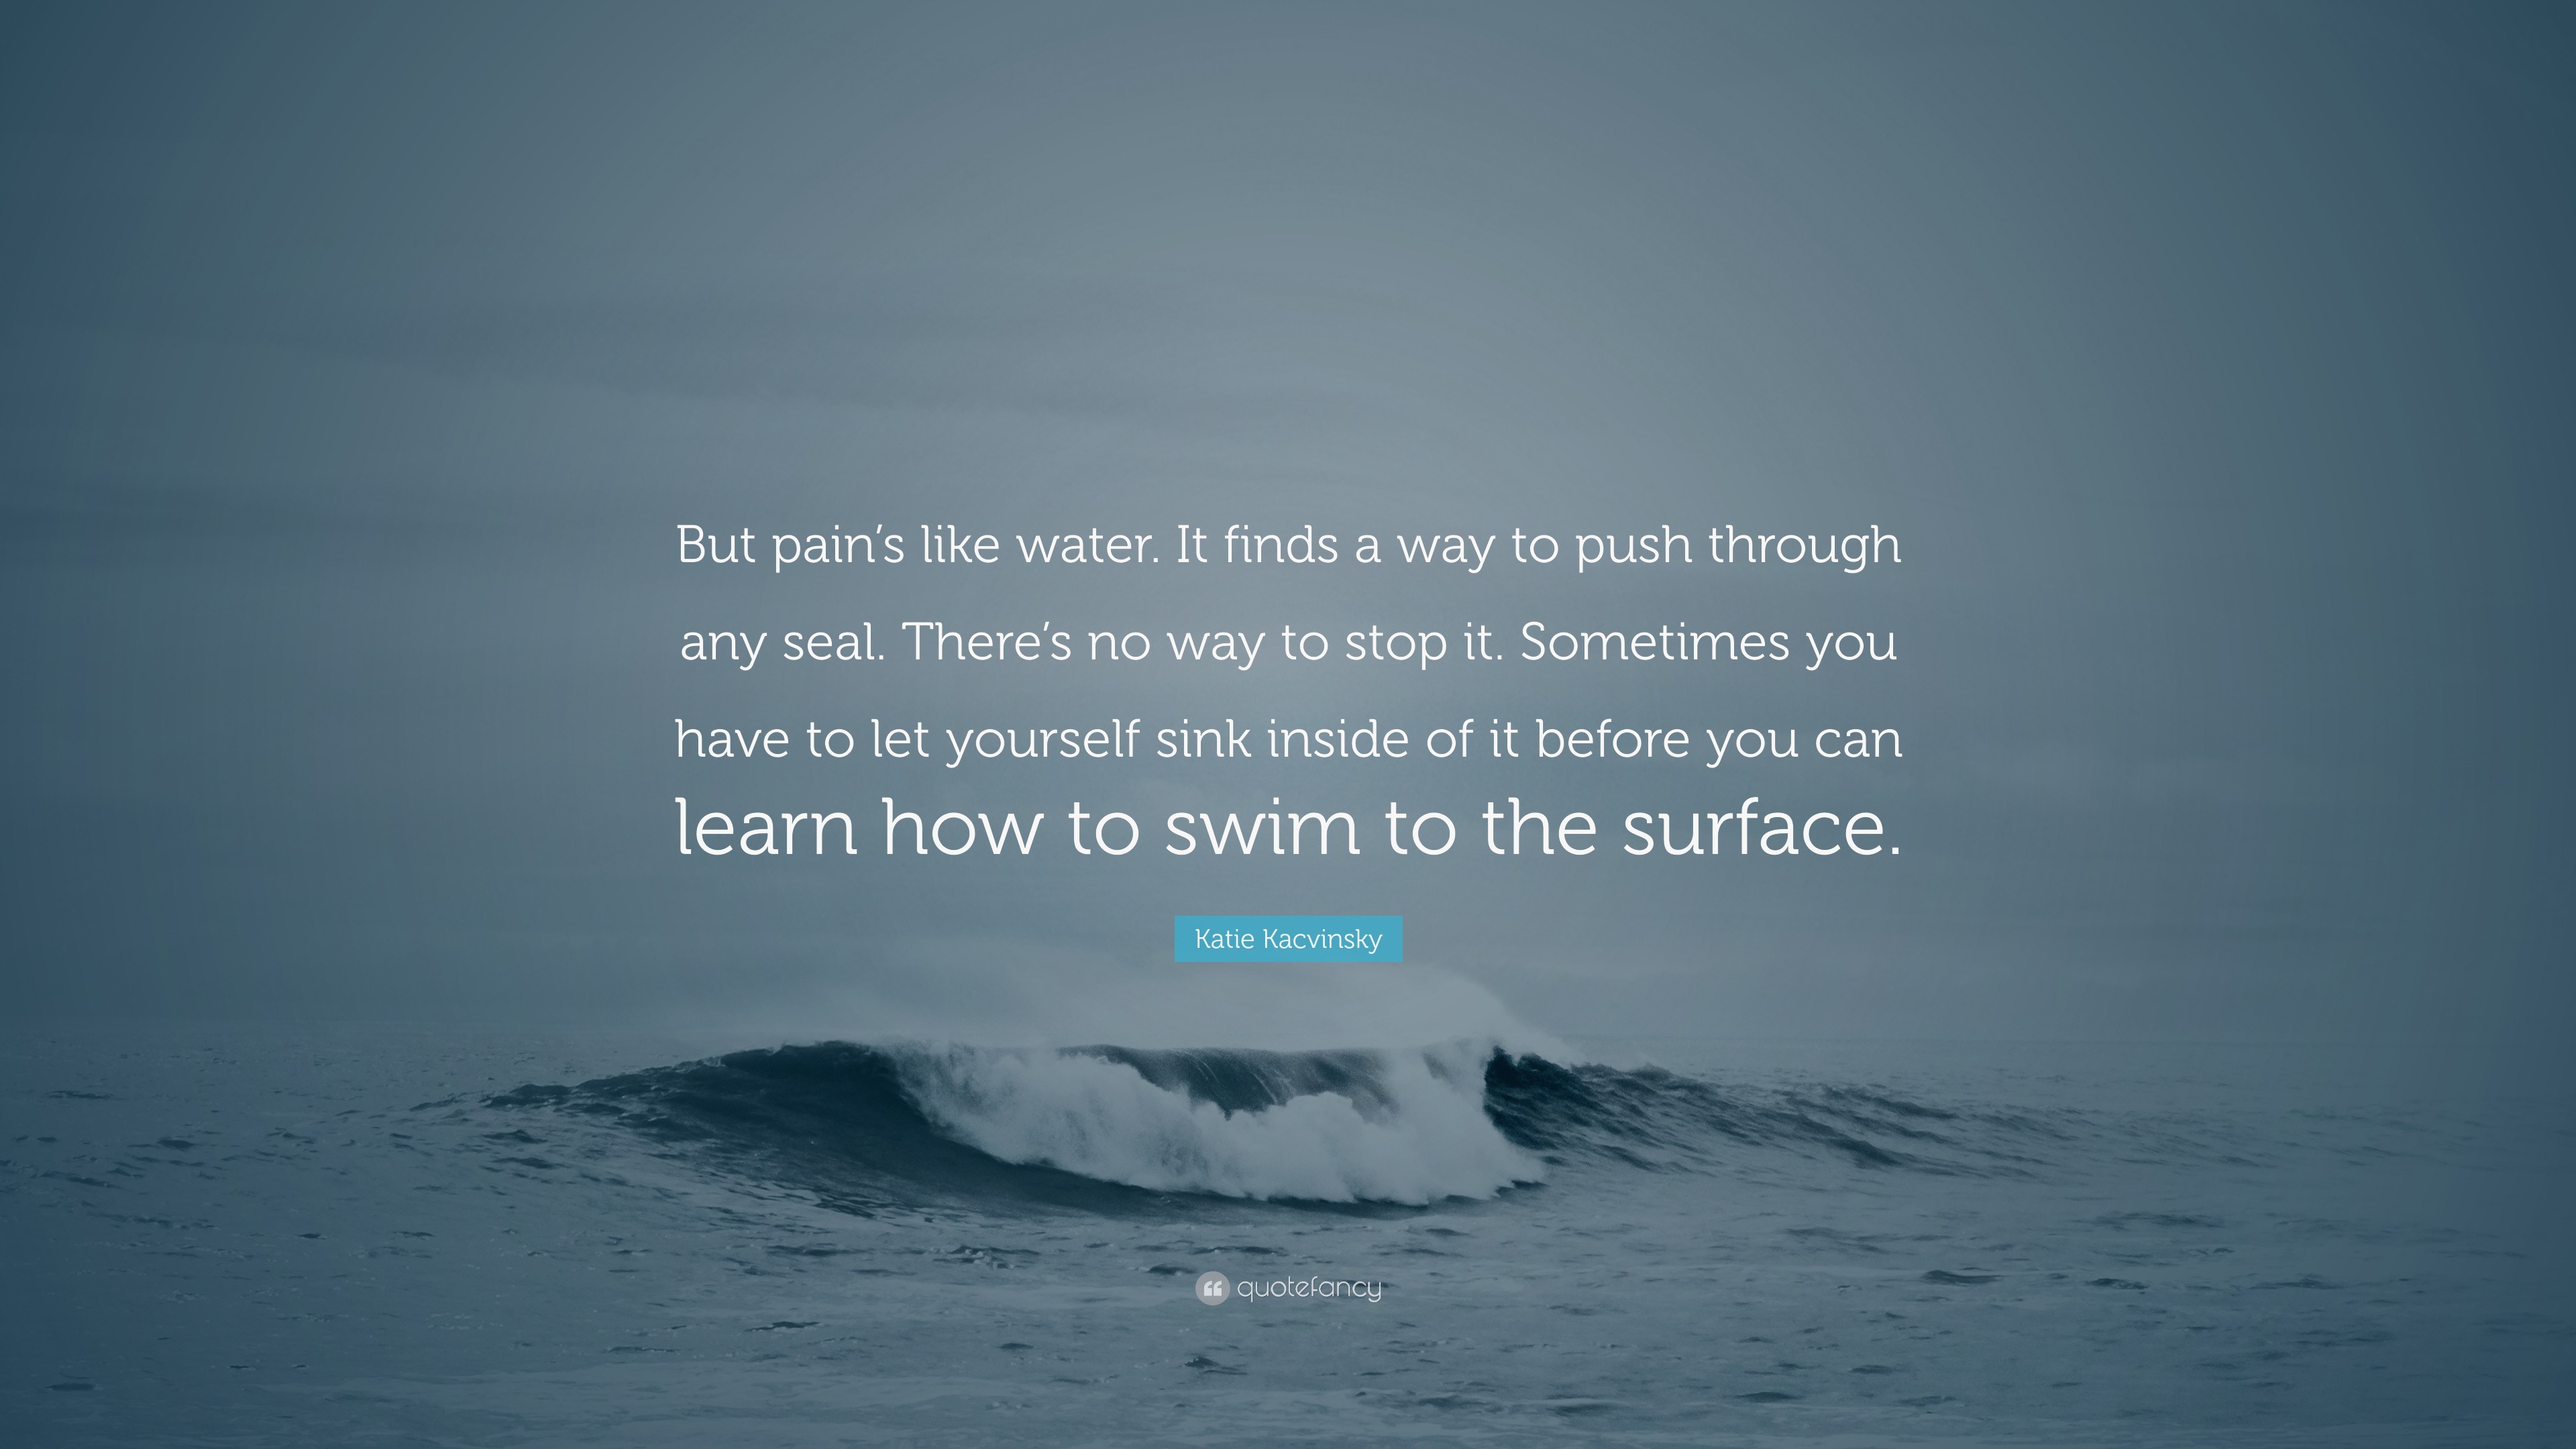 Katie Kacvinsky Quote: “But pain's like water. It finds a way to push  through any seal. There's no way to stop it. Sometimes you have to let  you”